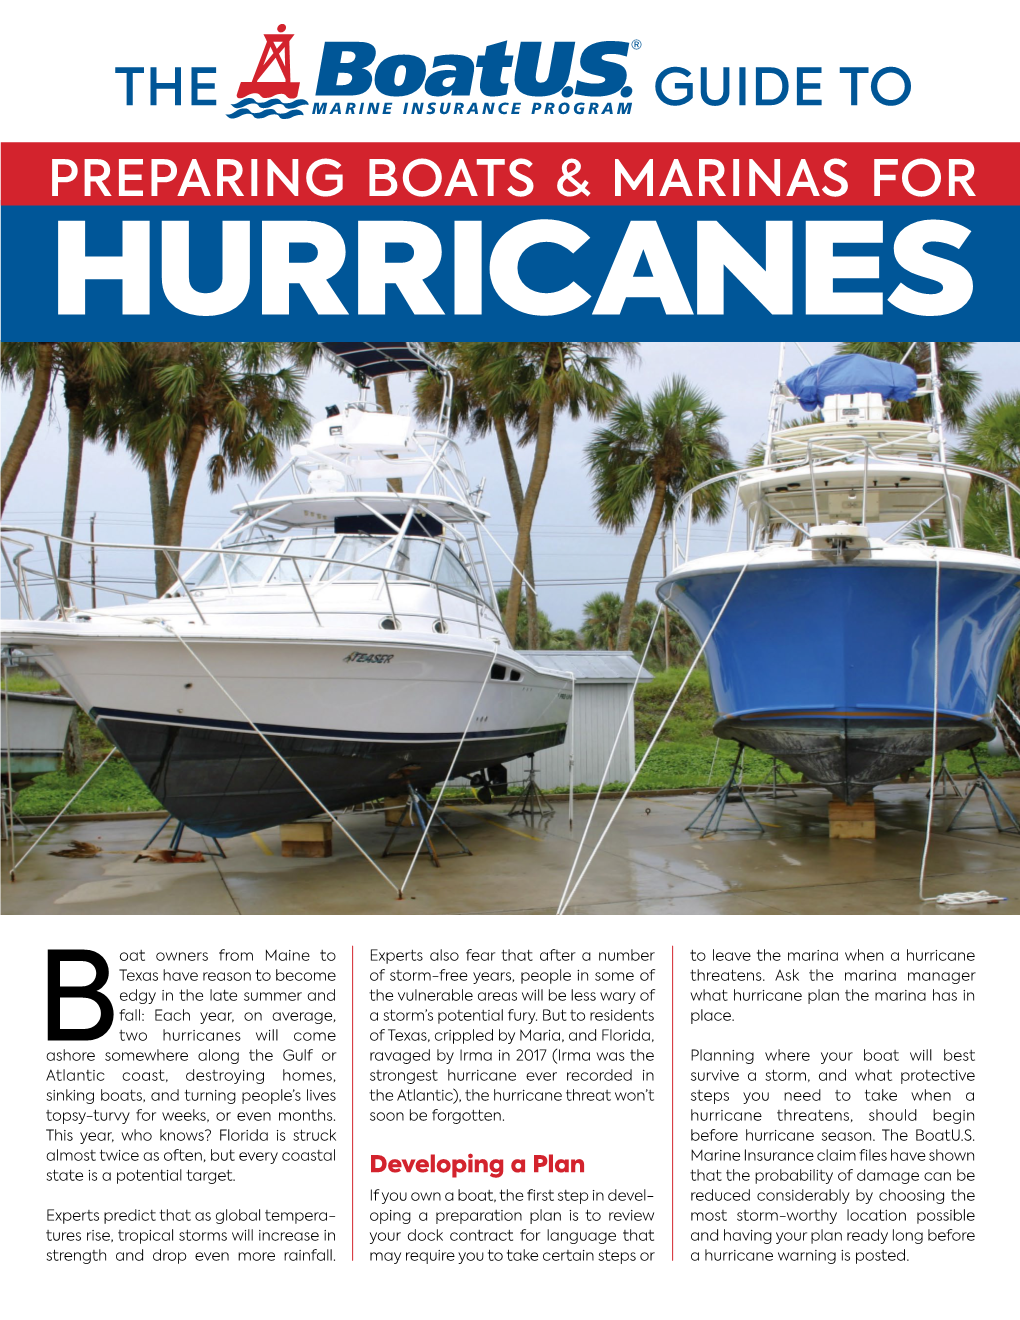 Guide to Preparing Boats & Marinas for Hurricanes